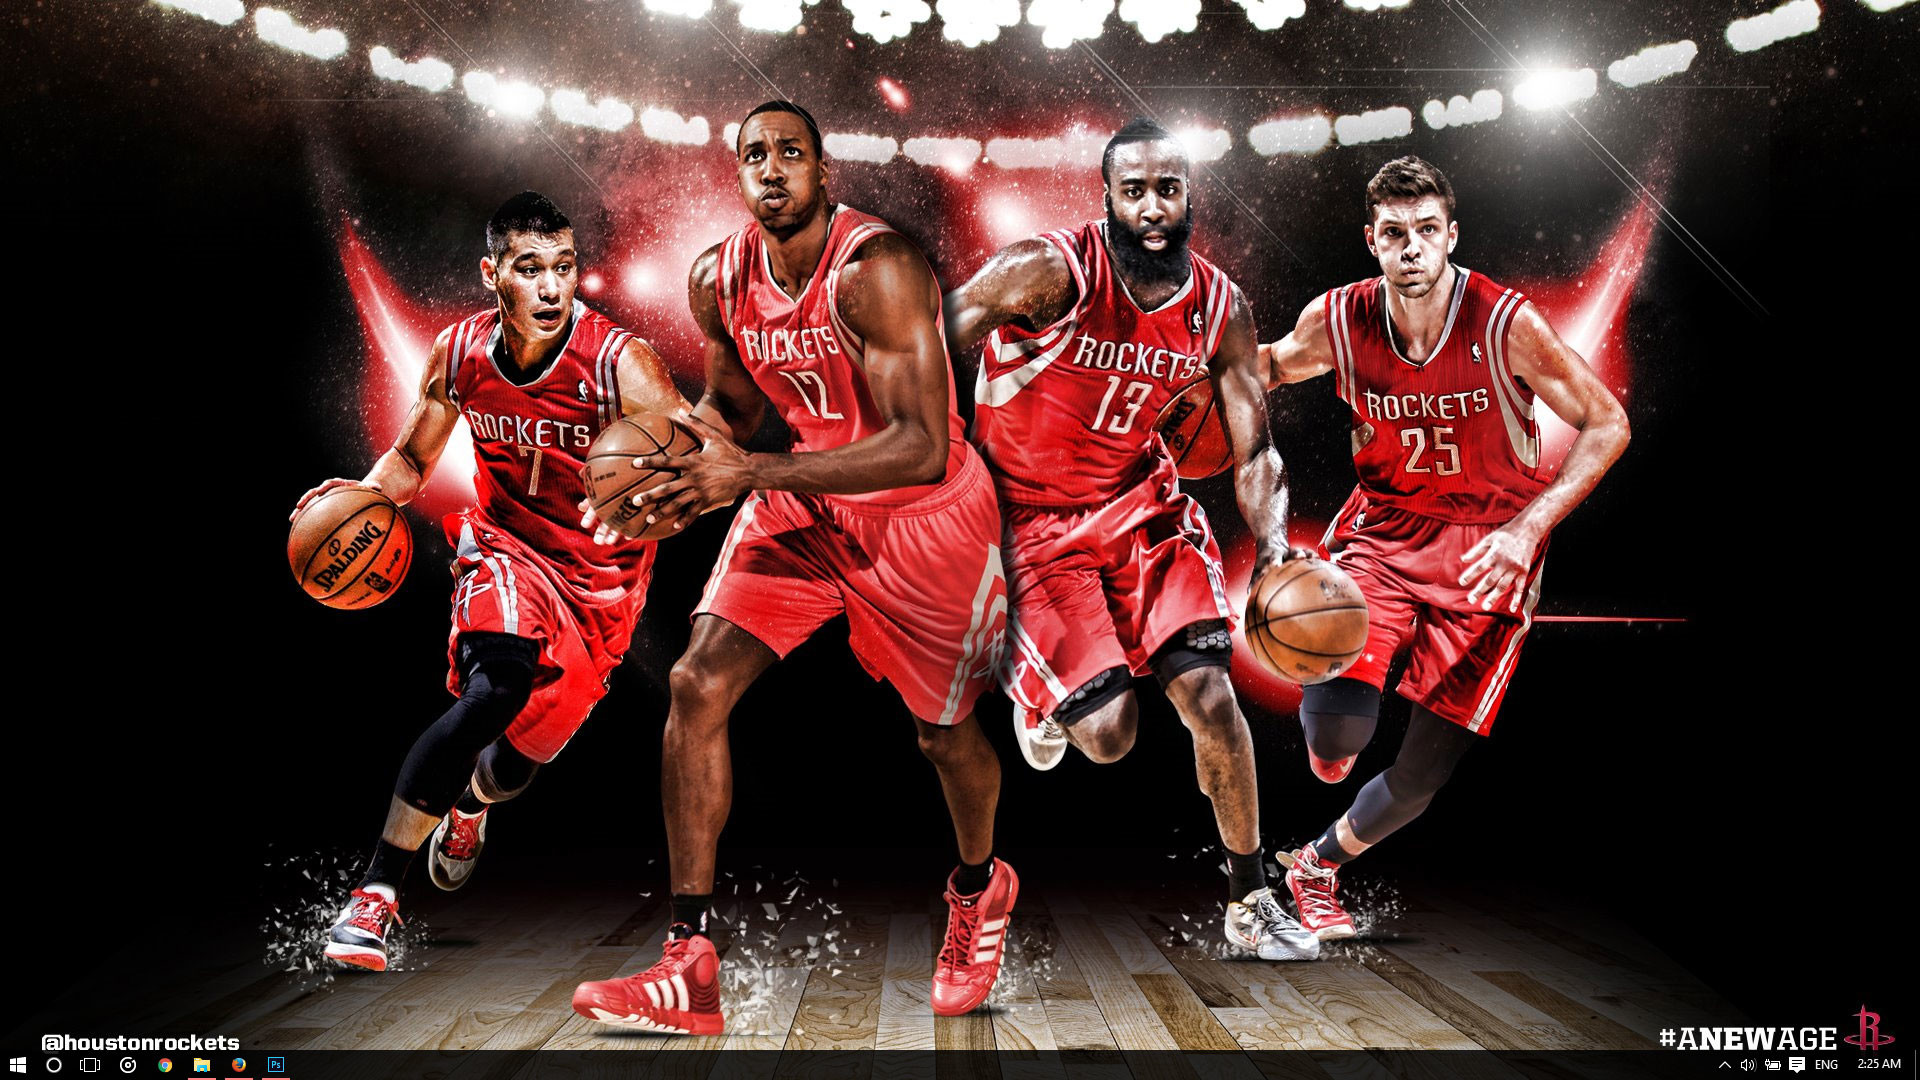 1920x1080 ... recent franchise acquisition of James Harden to fear the beard, other  players showing off the Rockets uniform, as well as their historic moments.